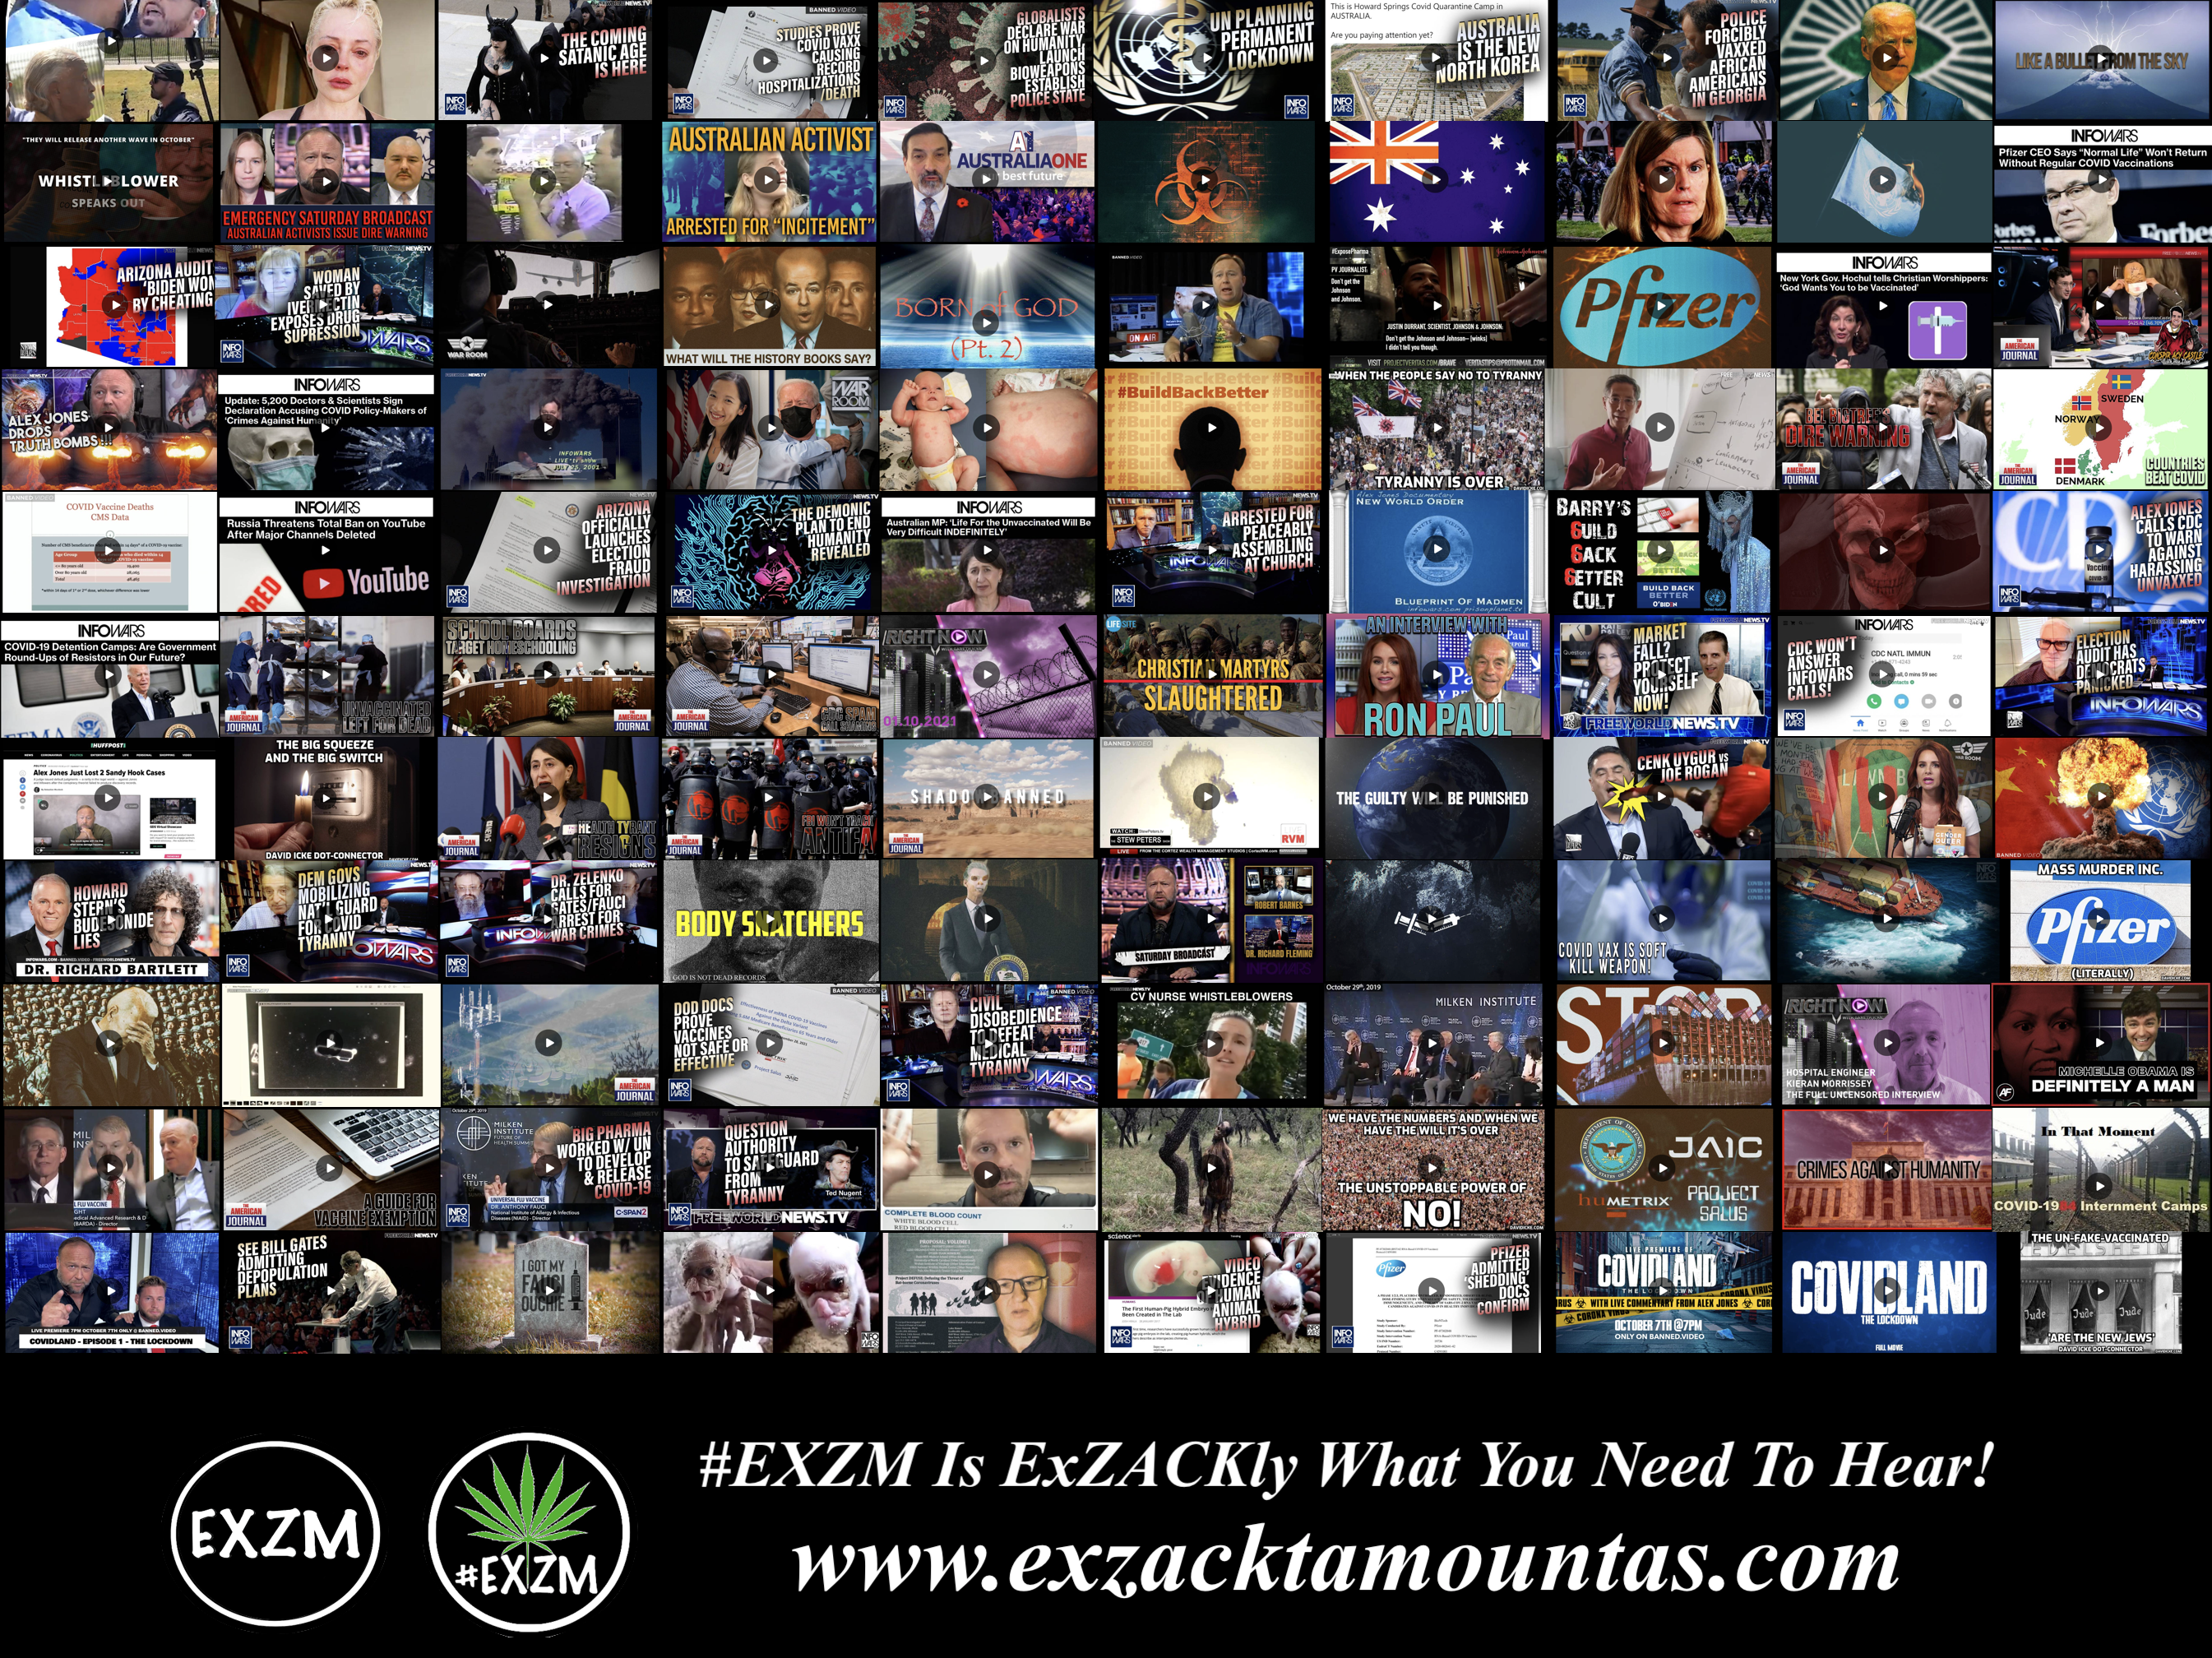 MOST WATCHED VIDEOS ON BANNED VIDEO DEEP STATE GLOBALISTS DEPOPULATION ELECTION FRAUD AND MUCH MORE EXZM Zack Mount September 29th 2021 page 6